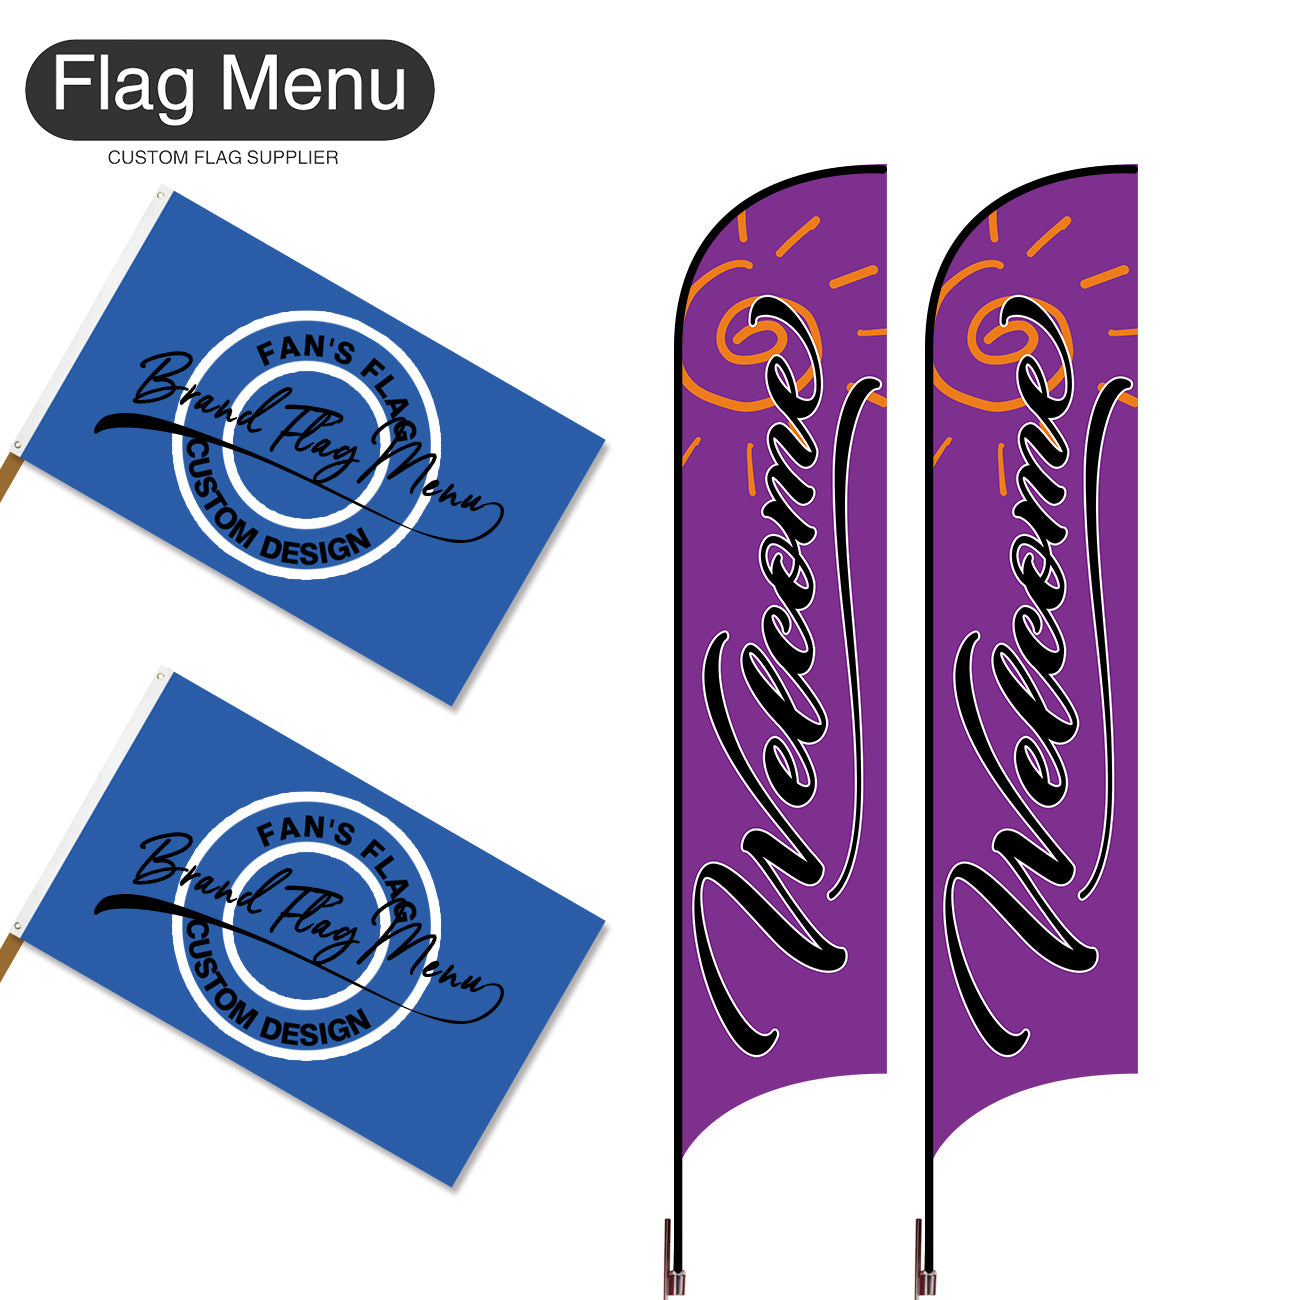 Outdoor Advertising Set - D-Purple A-S - Feather Flag -Double Sided & 3'x5' Regular Flag -Single Sided-Cross & Water Bag-Flag Menu